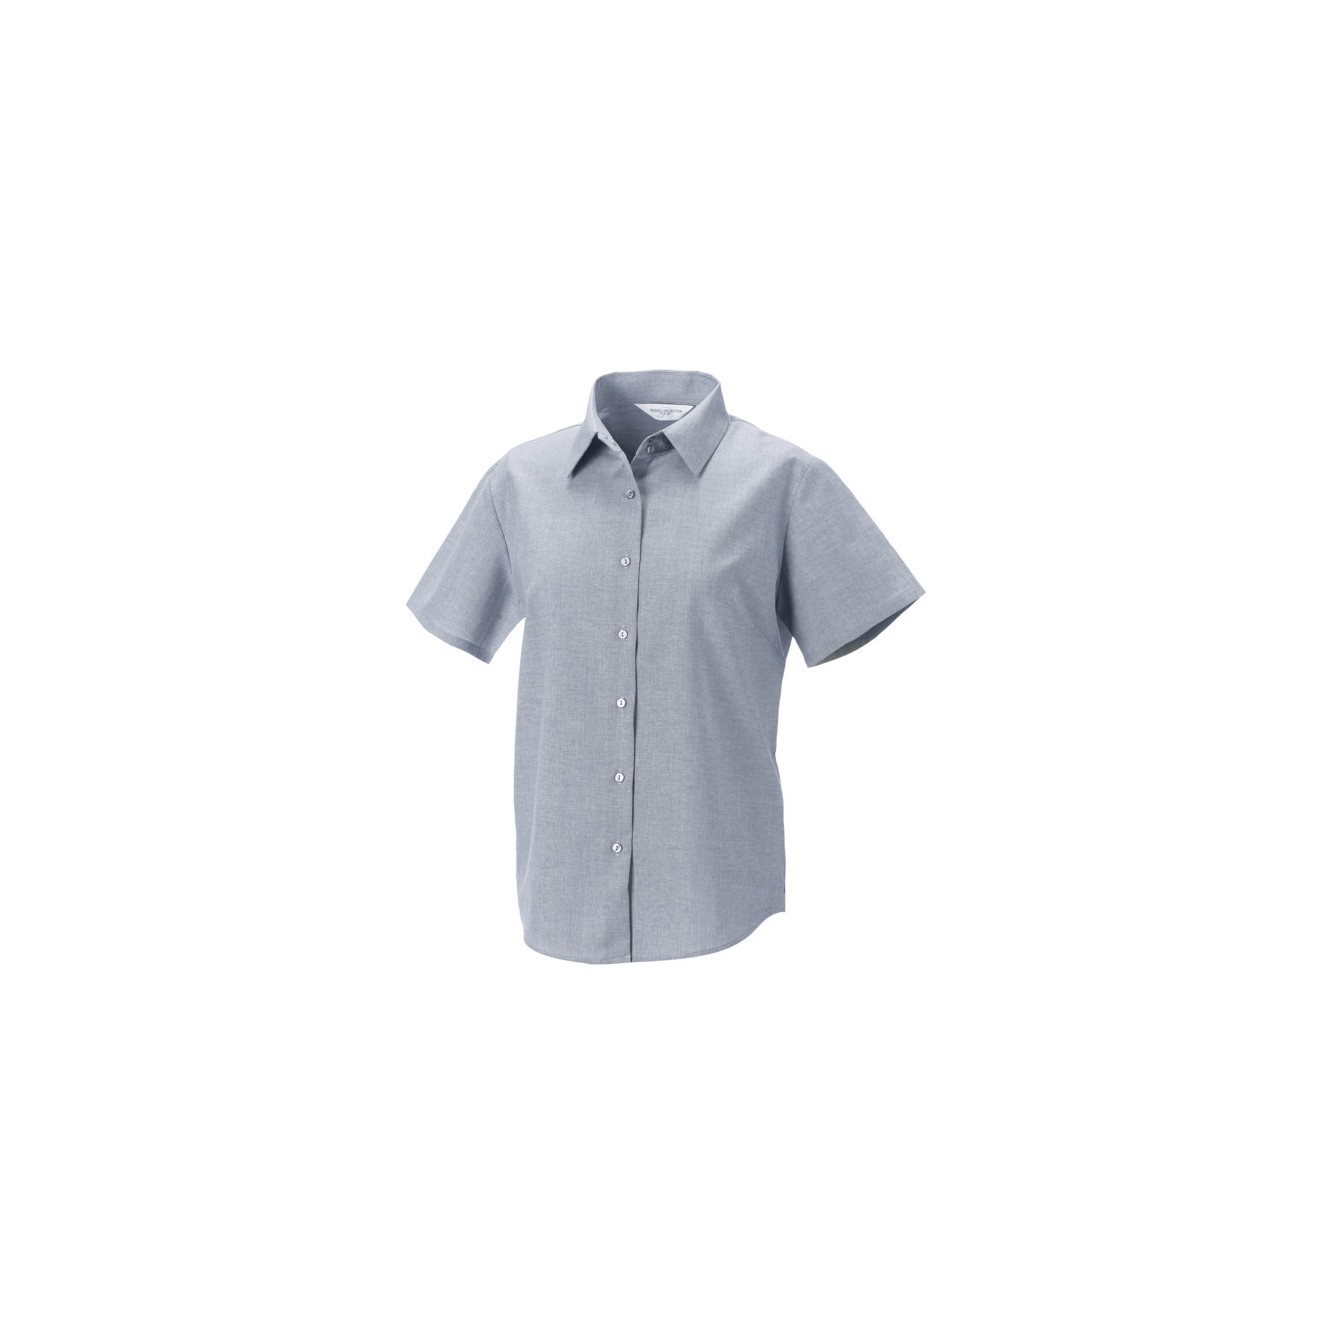 Ladies ss easy care oxford shirt